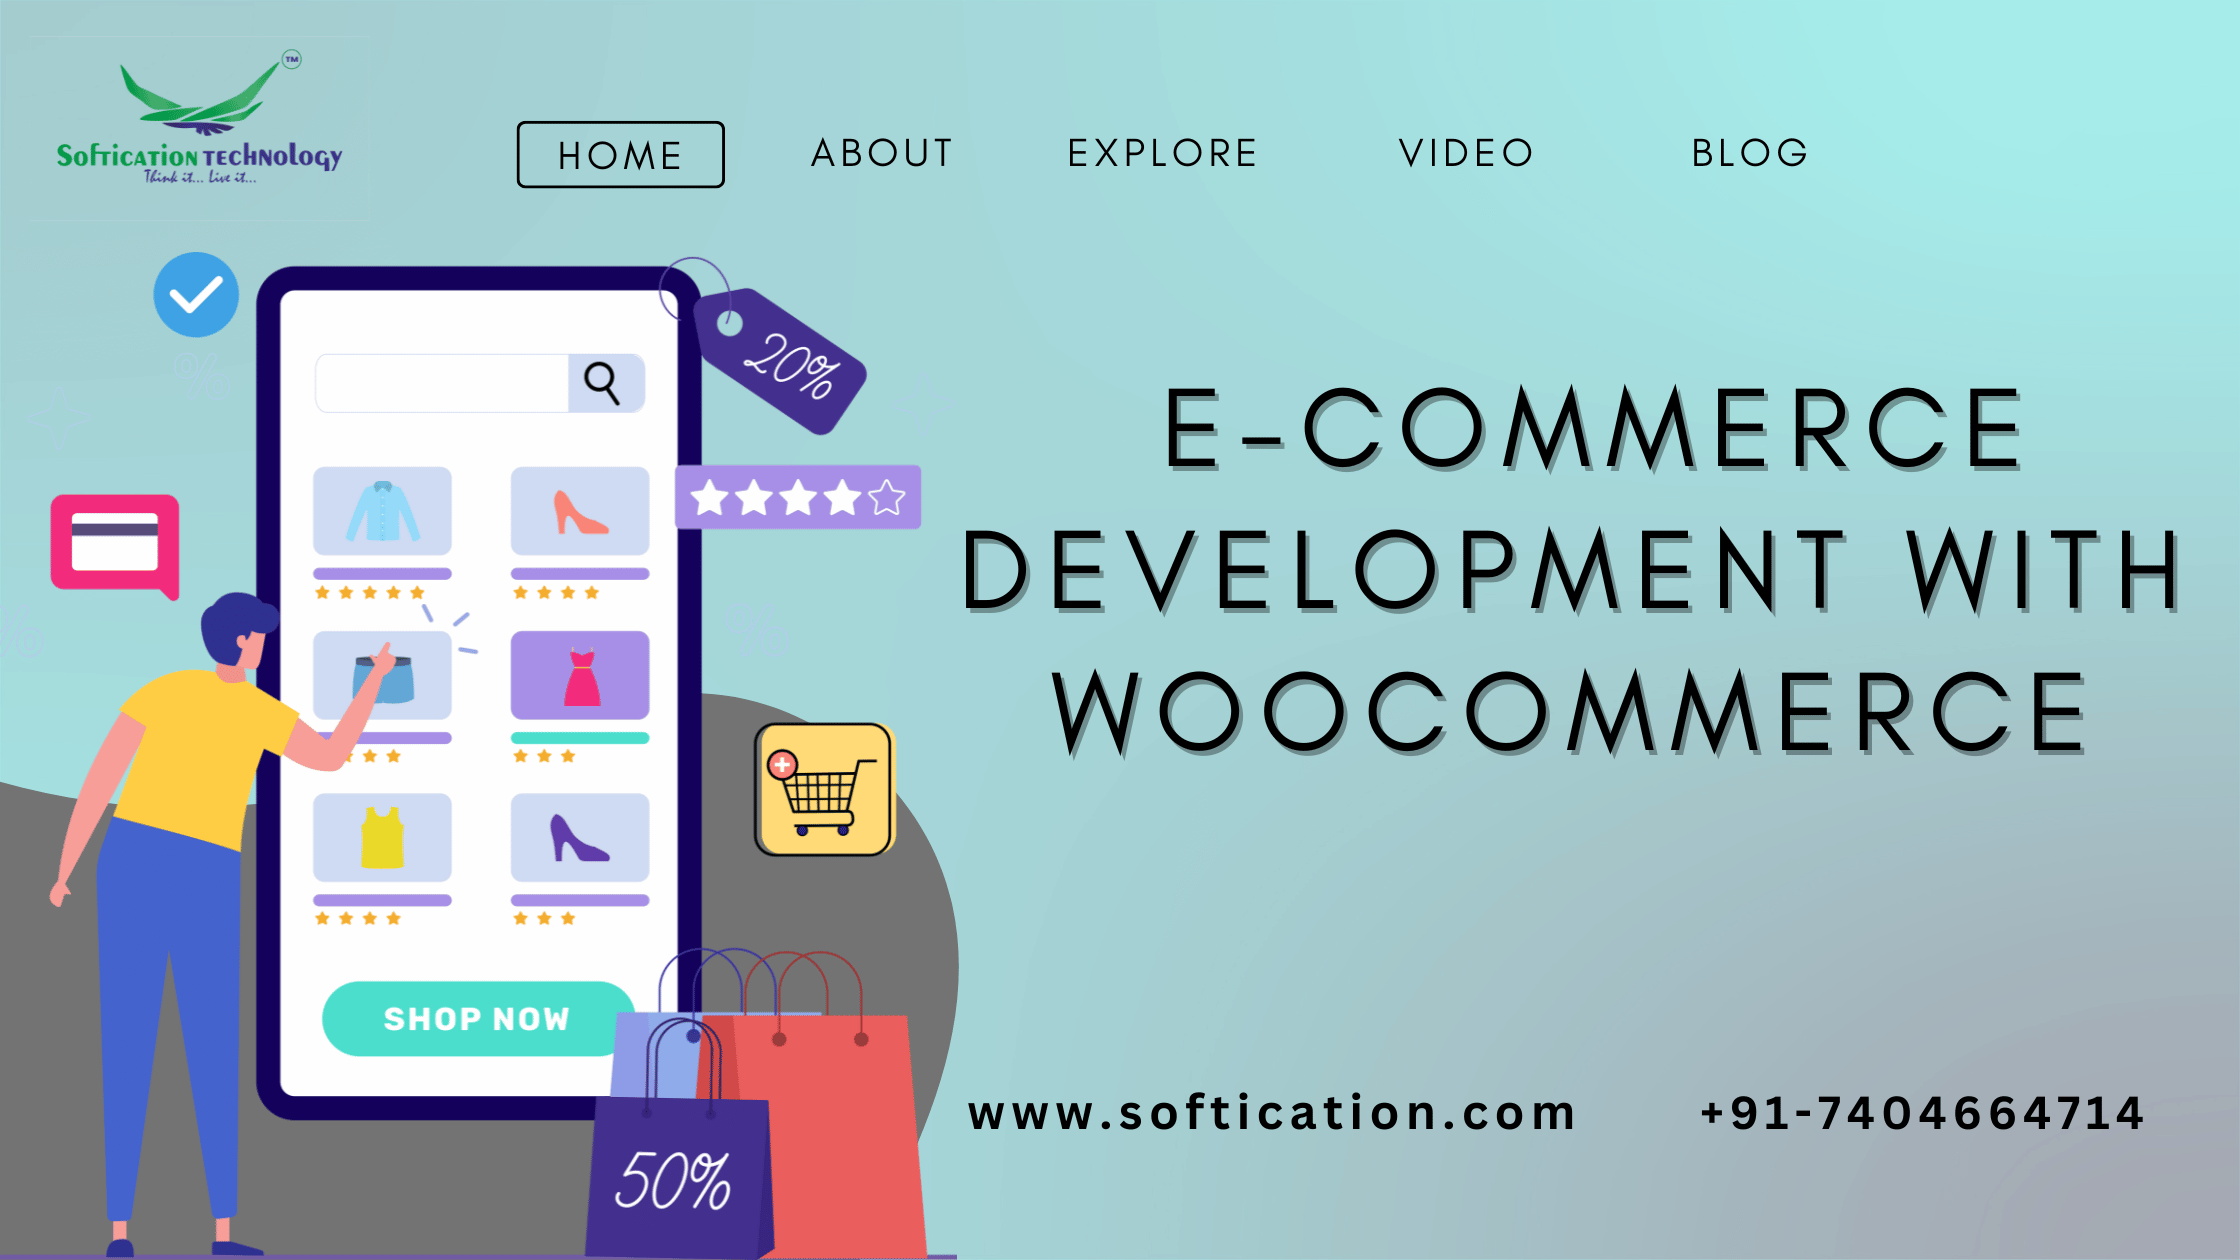 Discover SoftiCation Technology's comprehensive WooCommerce e-commerce development services, tailored to boost your business with customized solutions, SEO optimization, and advanced features.